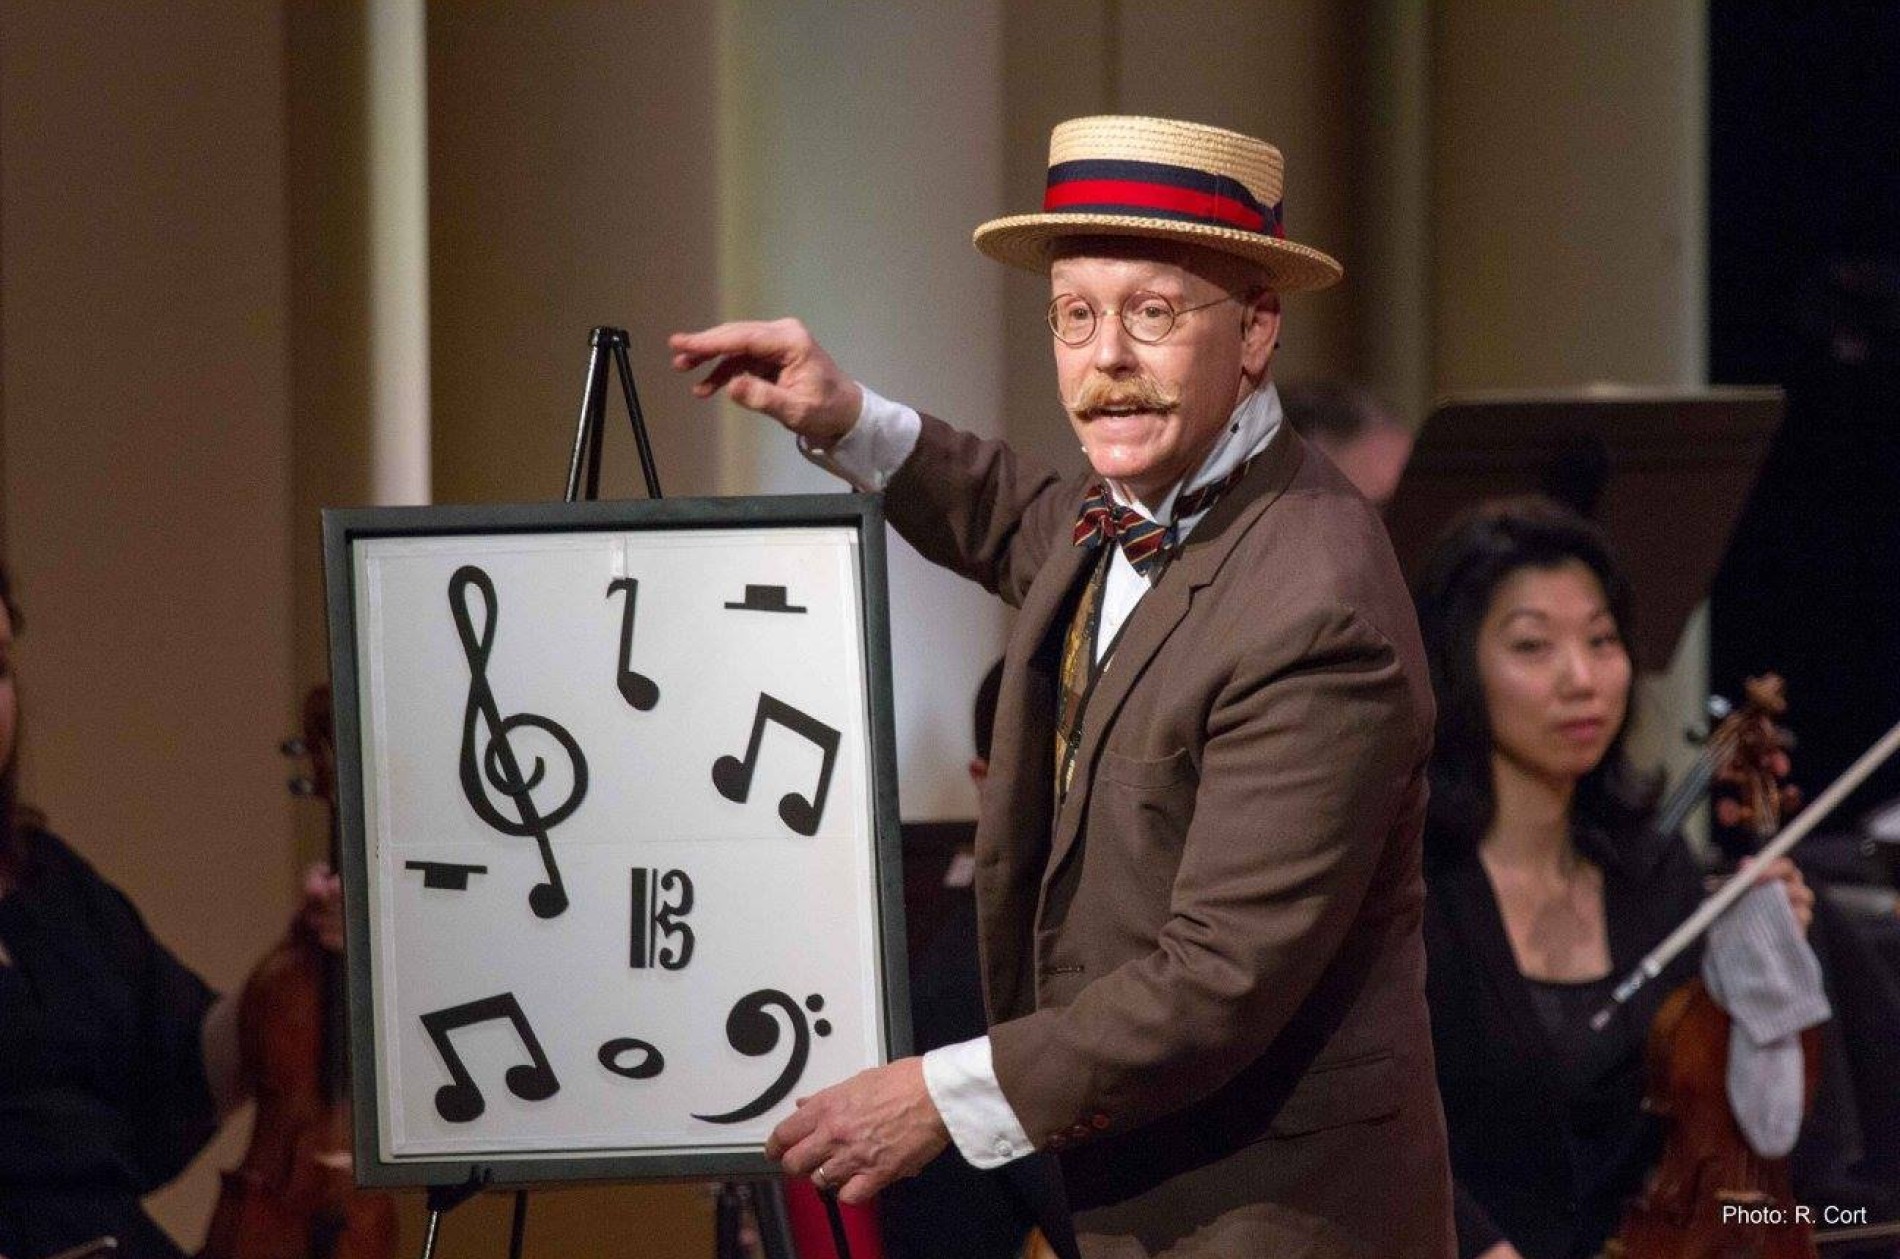 Michael Boudewyns wears and brown suit and boater hat as he points out musical notes on an easel display in front of string players